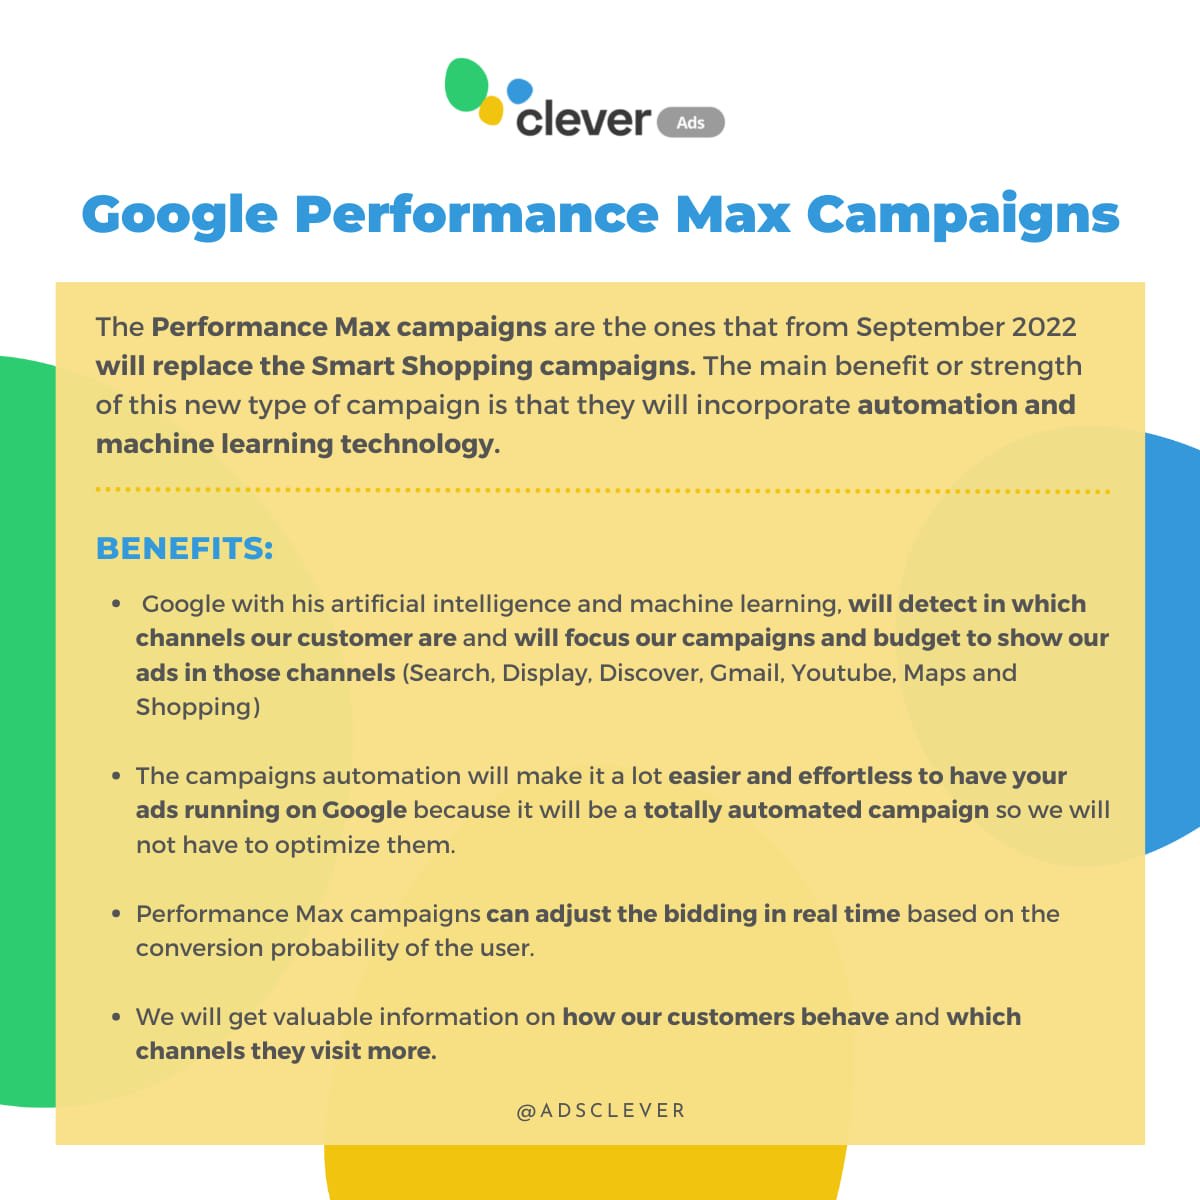 google performance max campaigns infographic